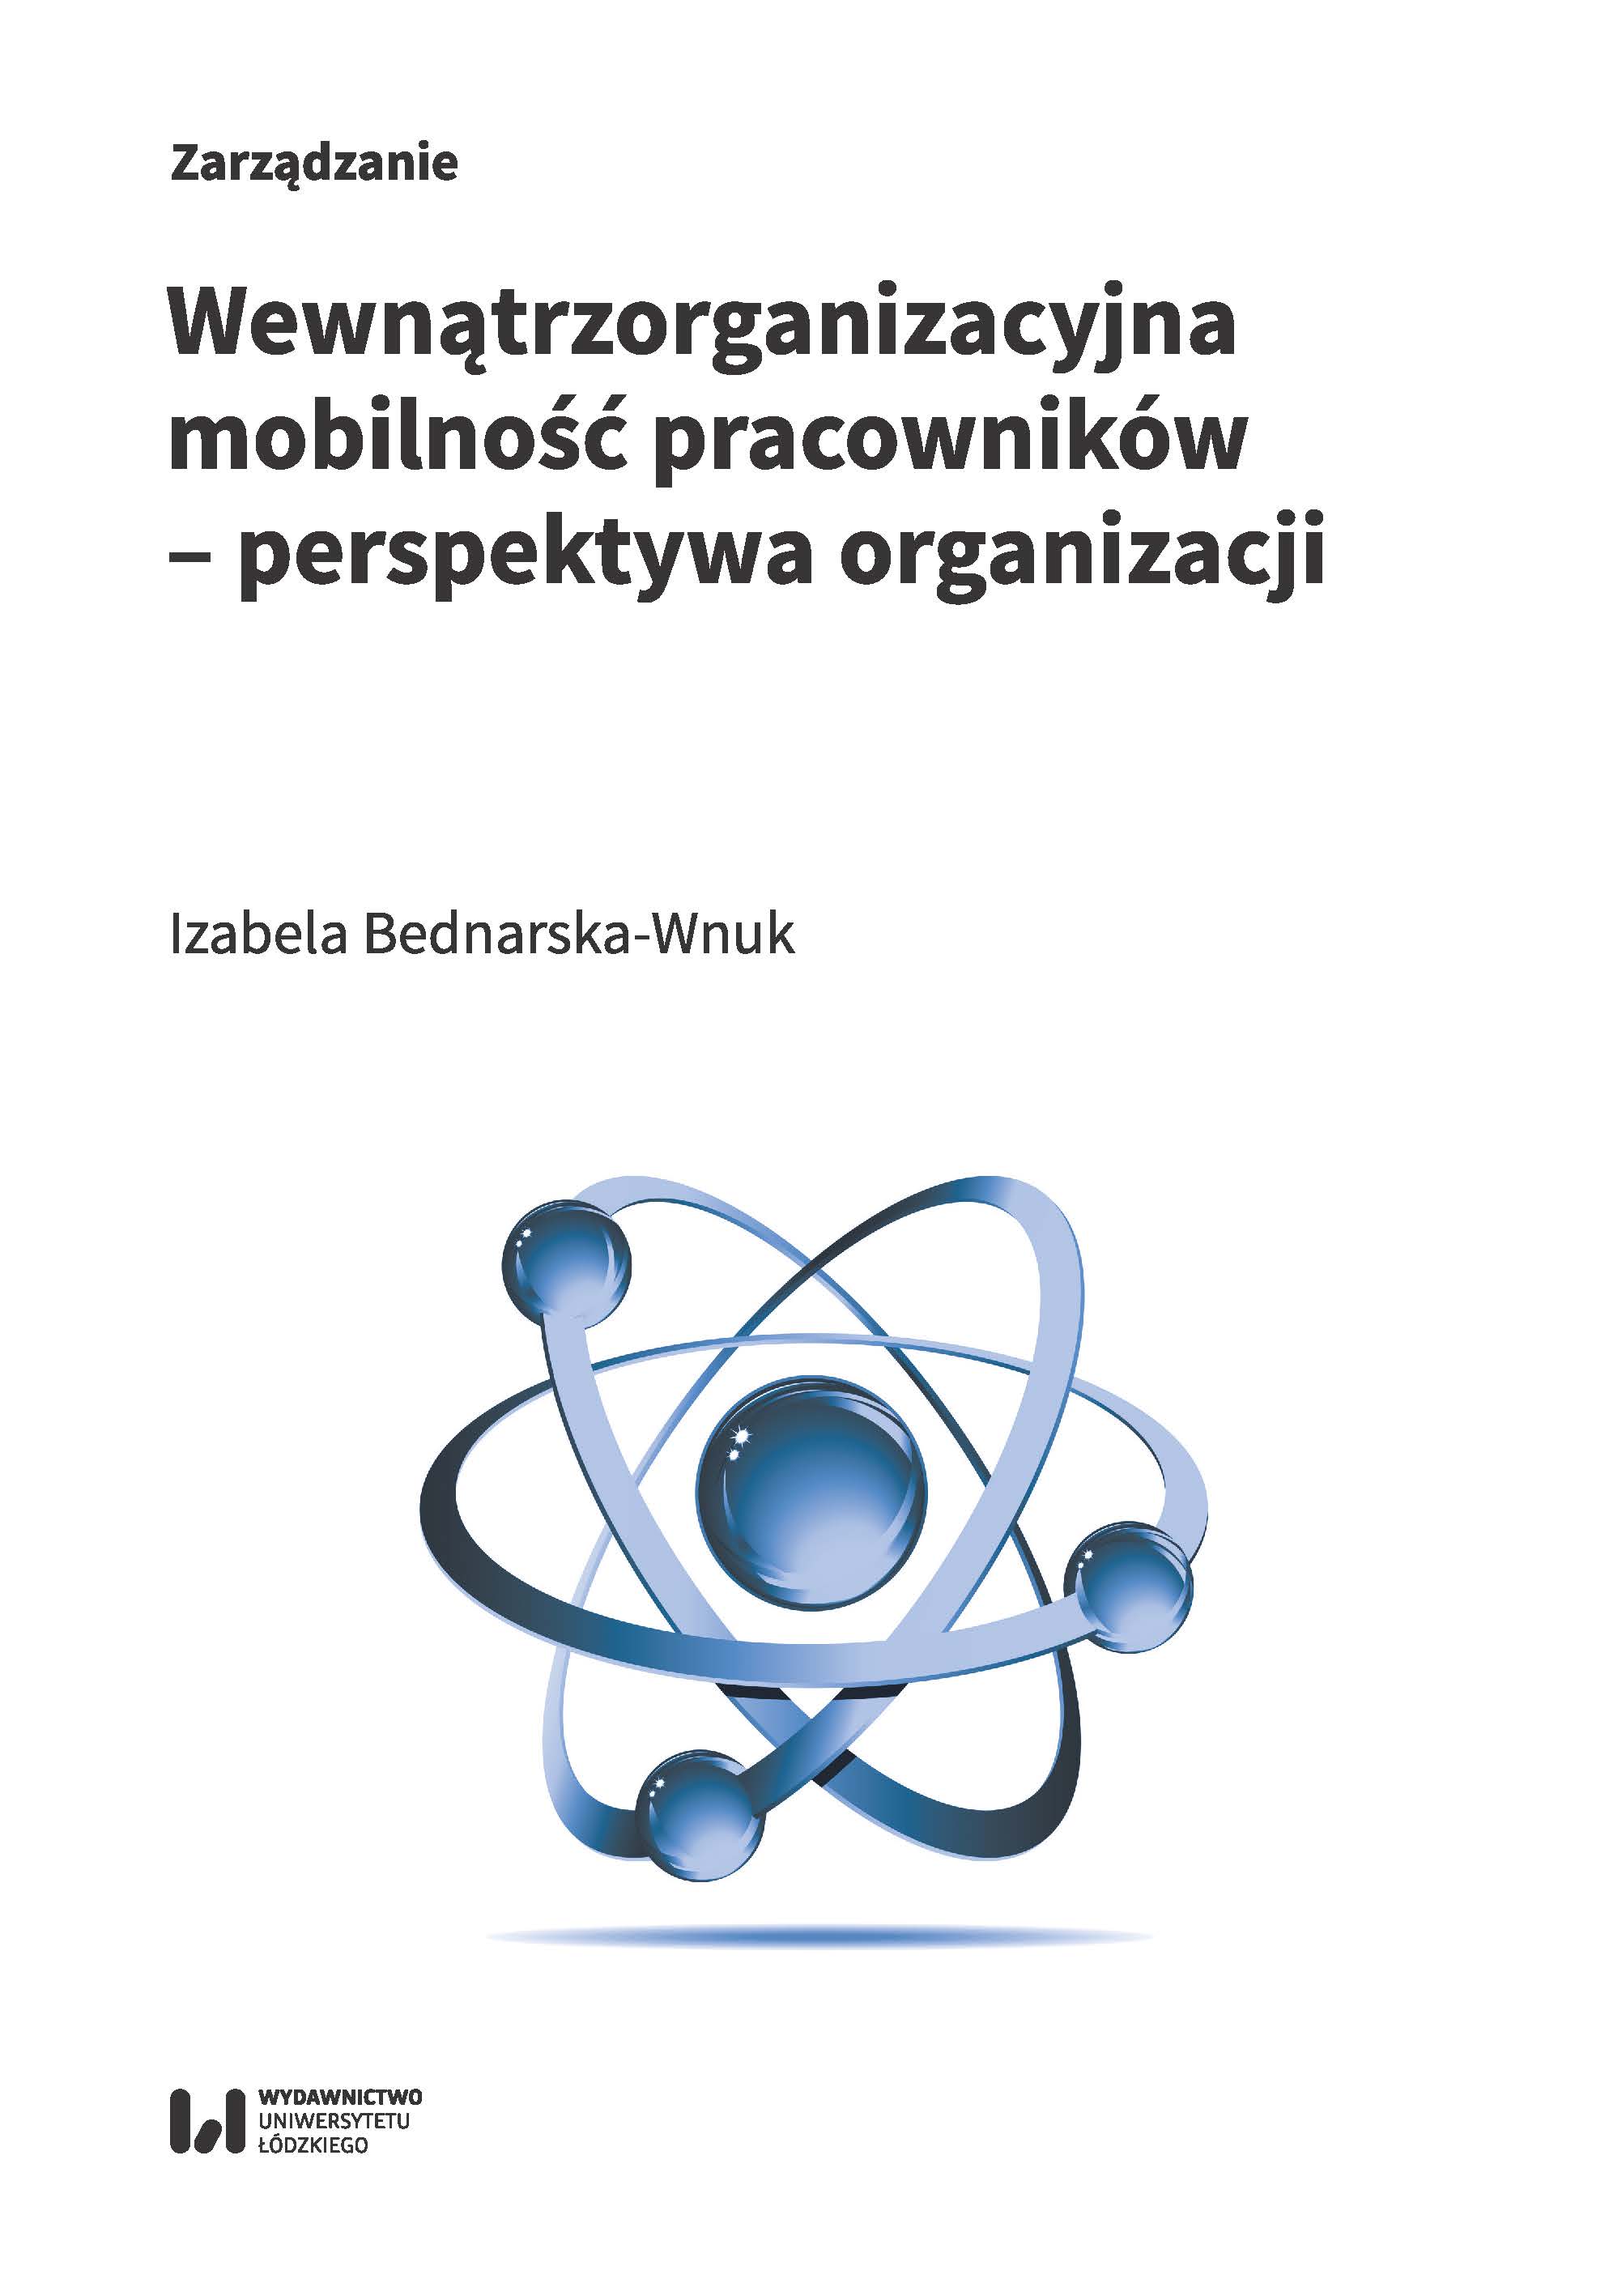 Intraorganizational mobility of employees - the perspective of the organization